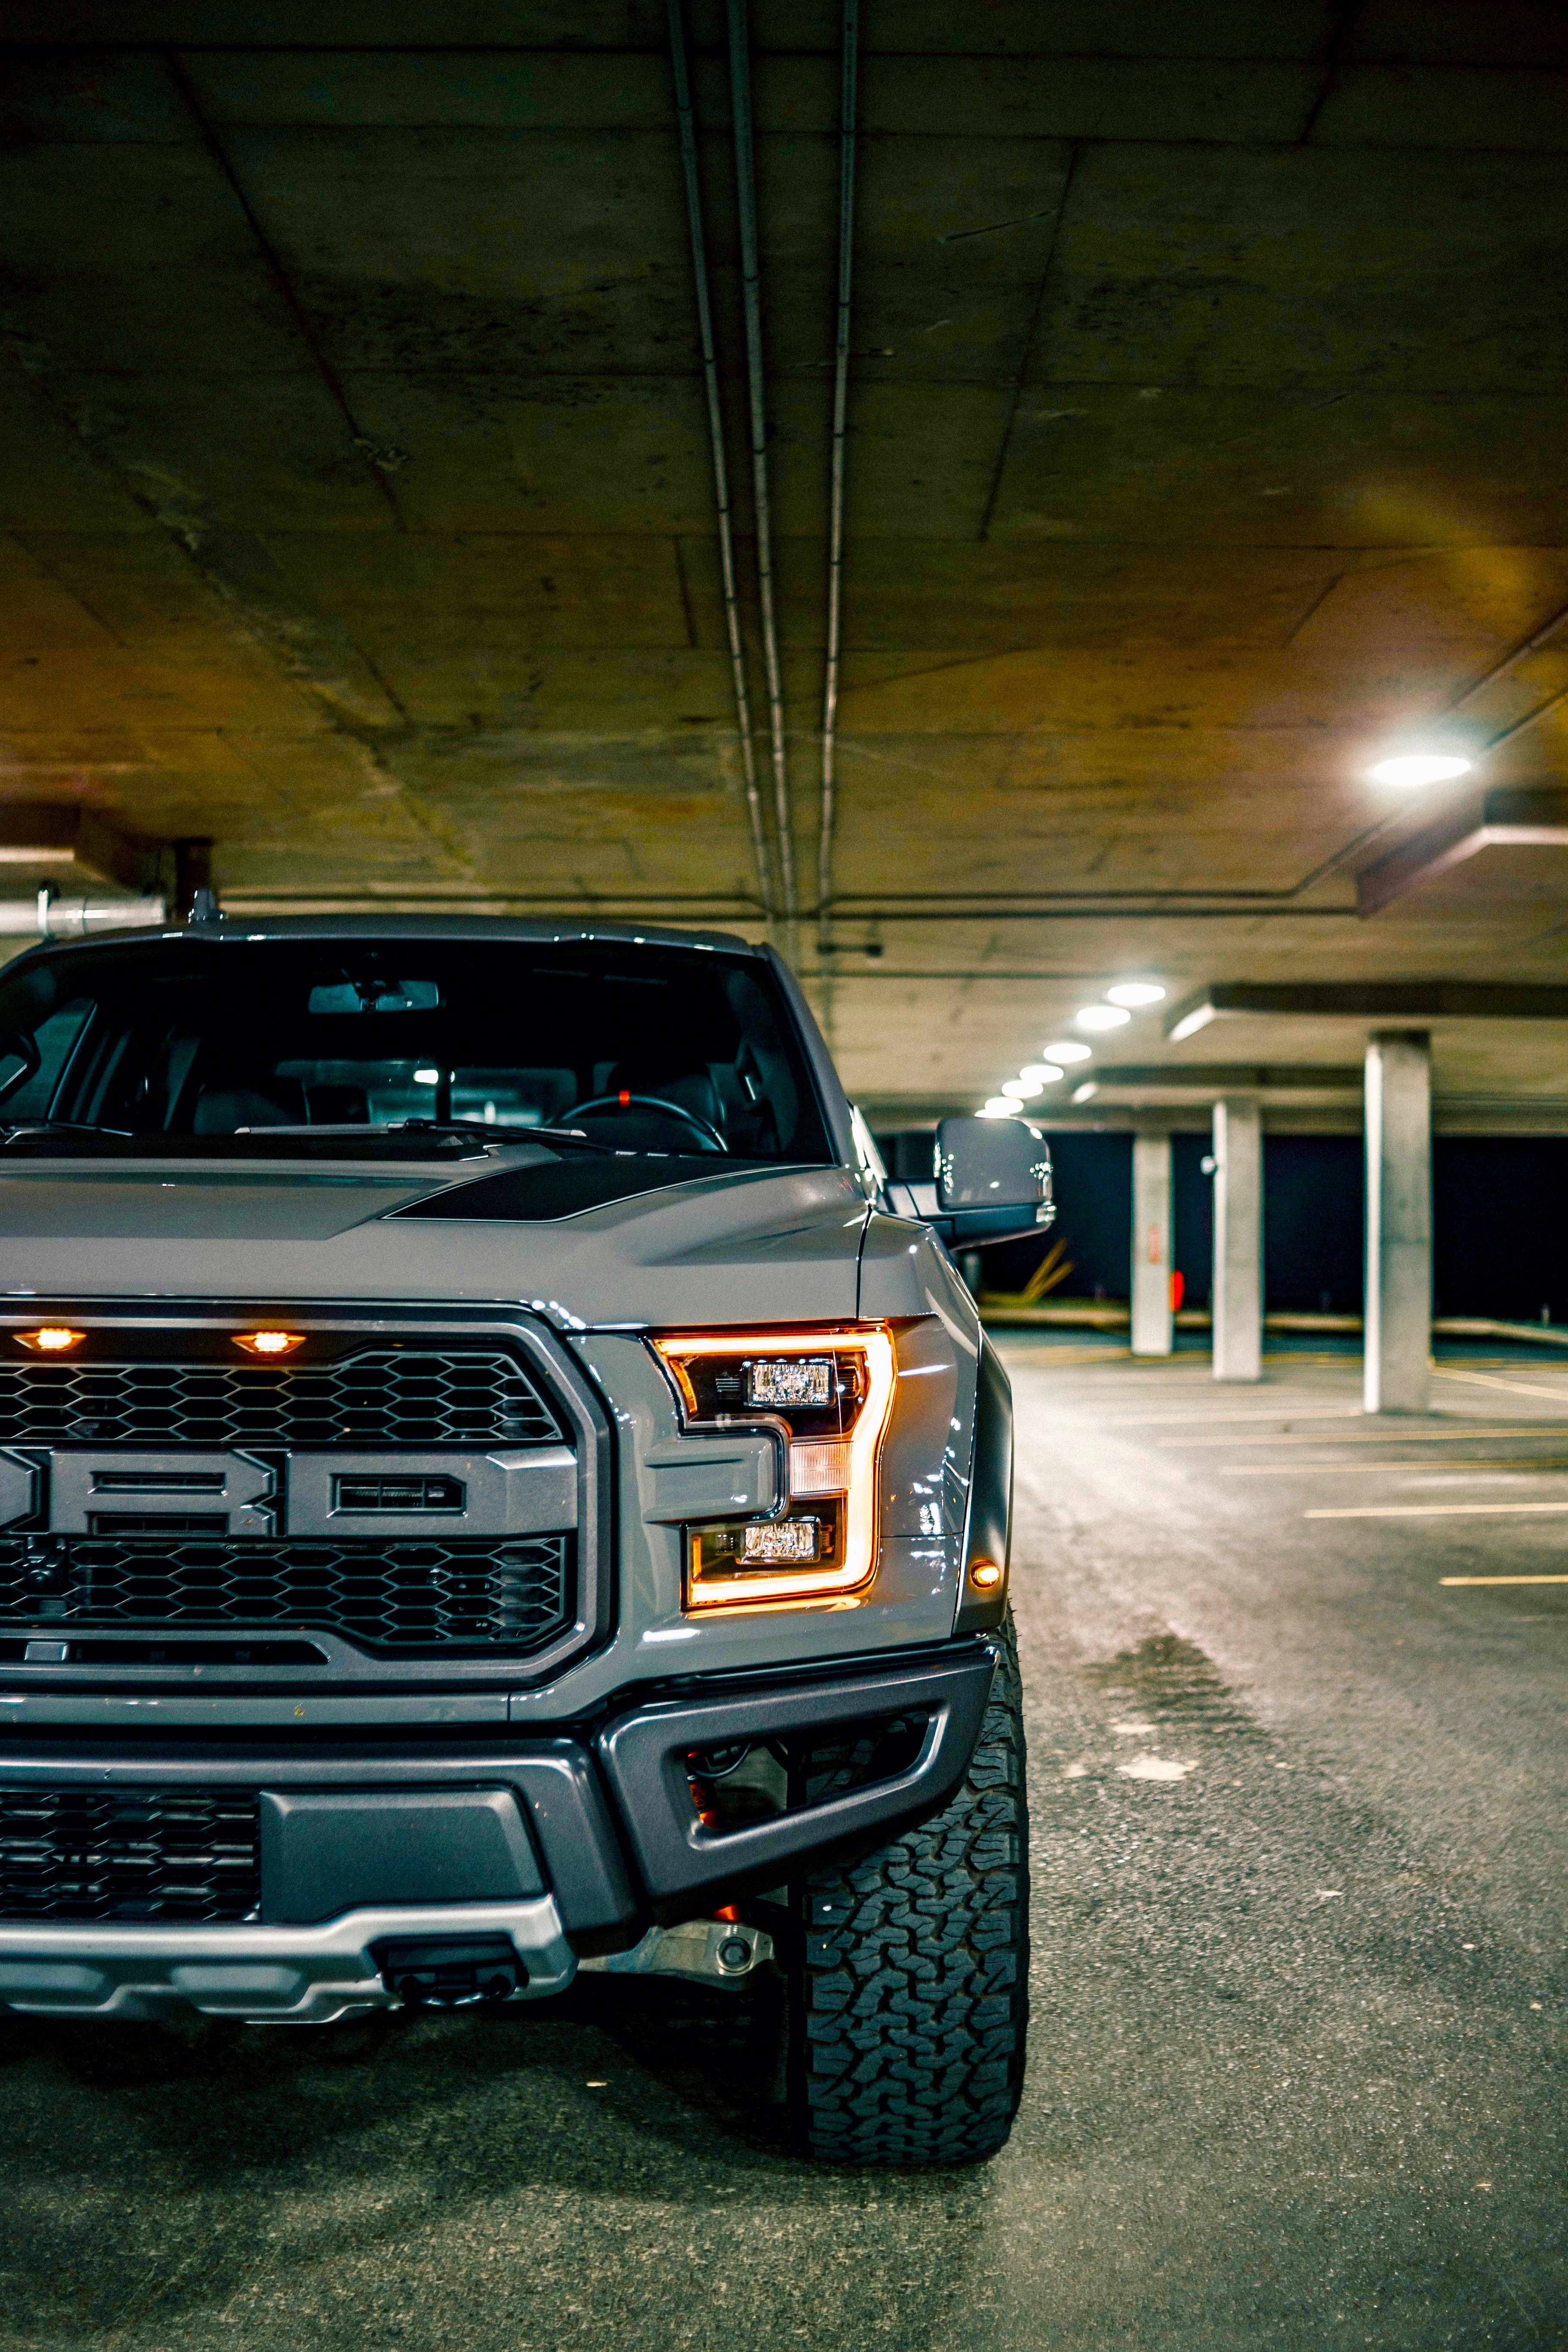 ford raptor, ford, suv, car, front view, cars, grey, parking